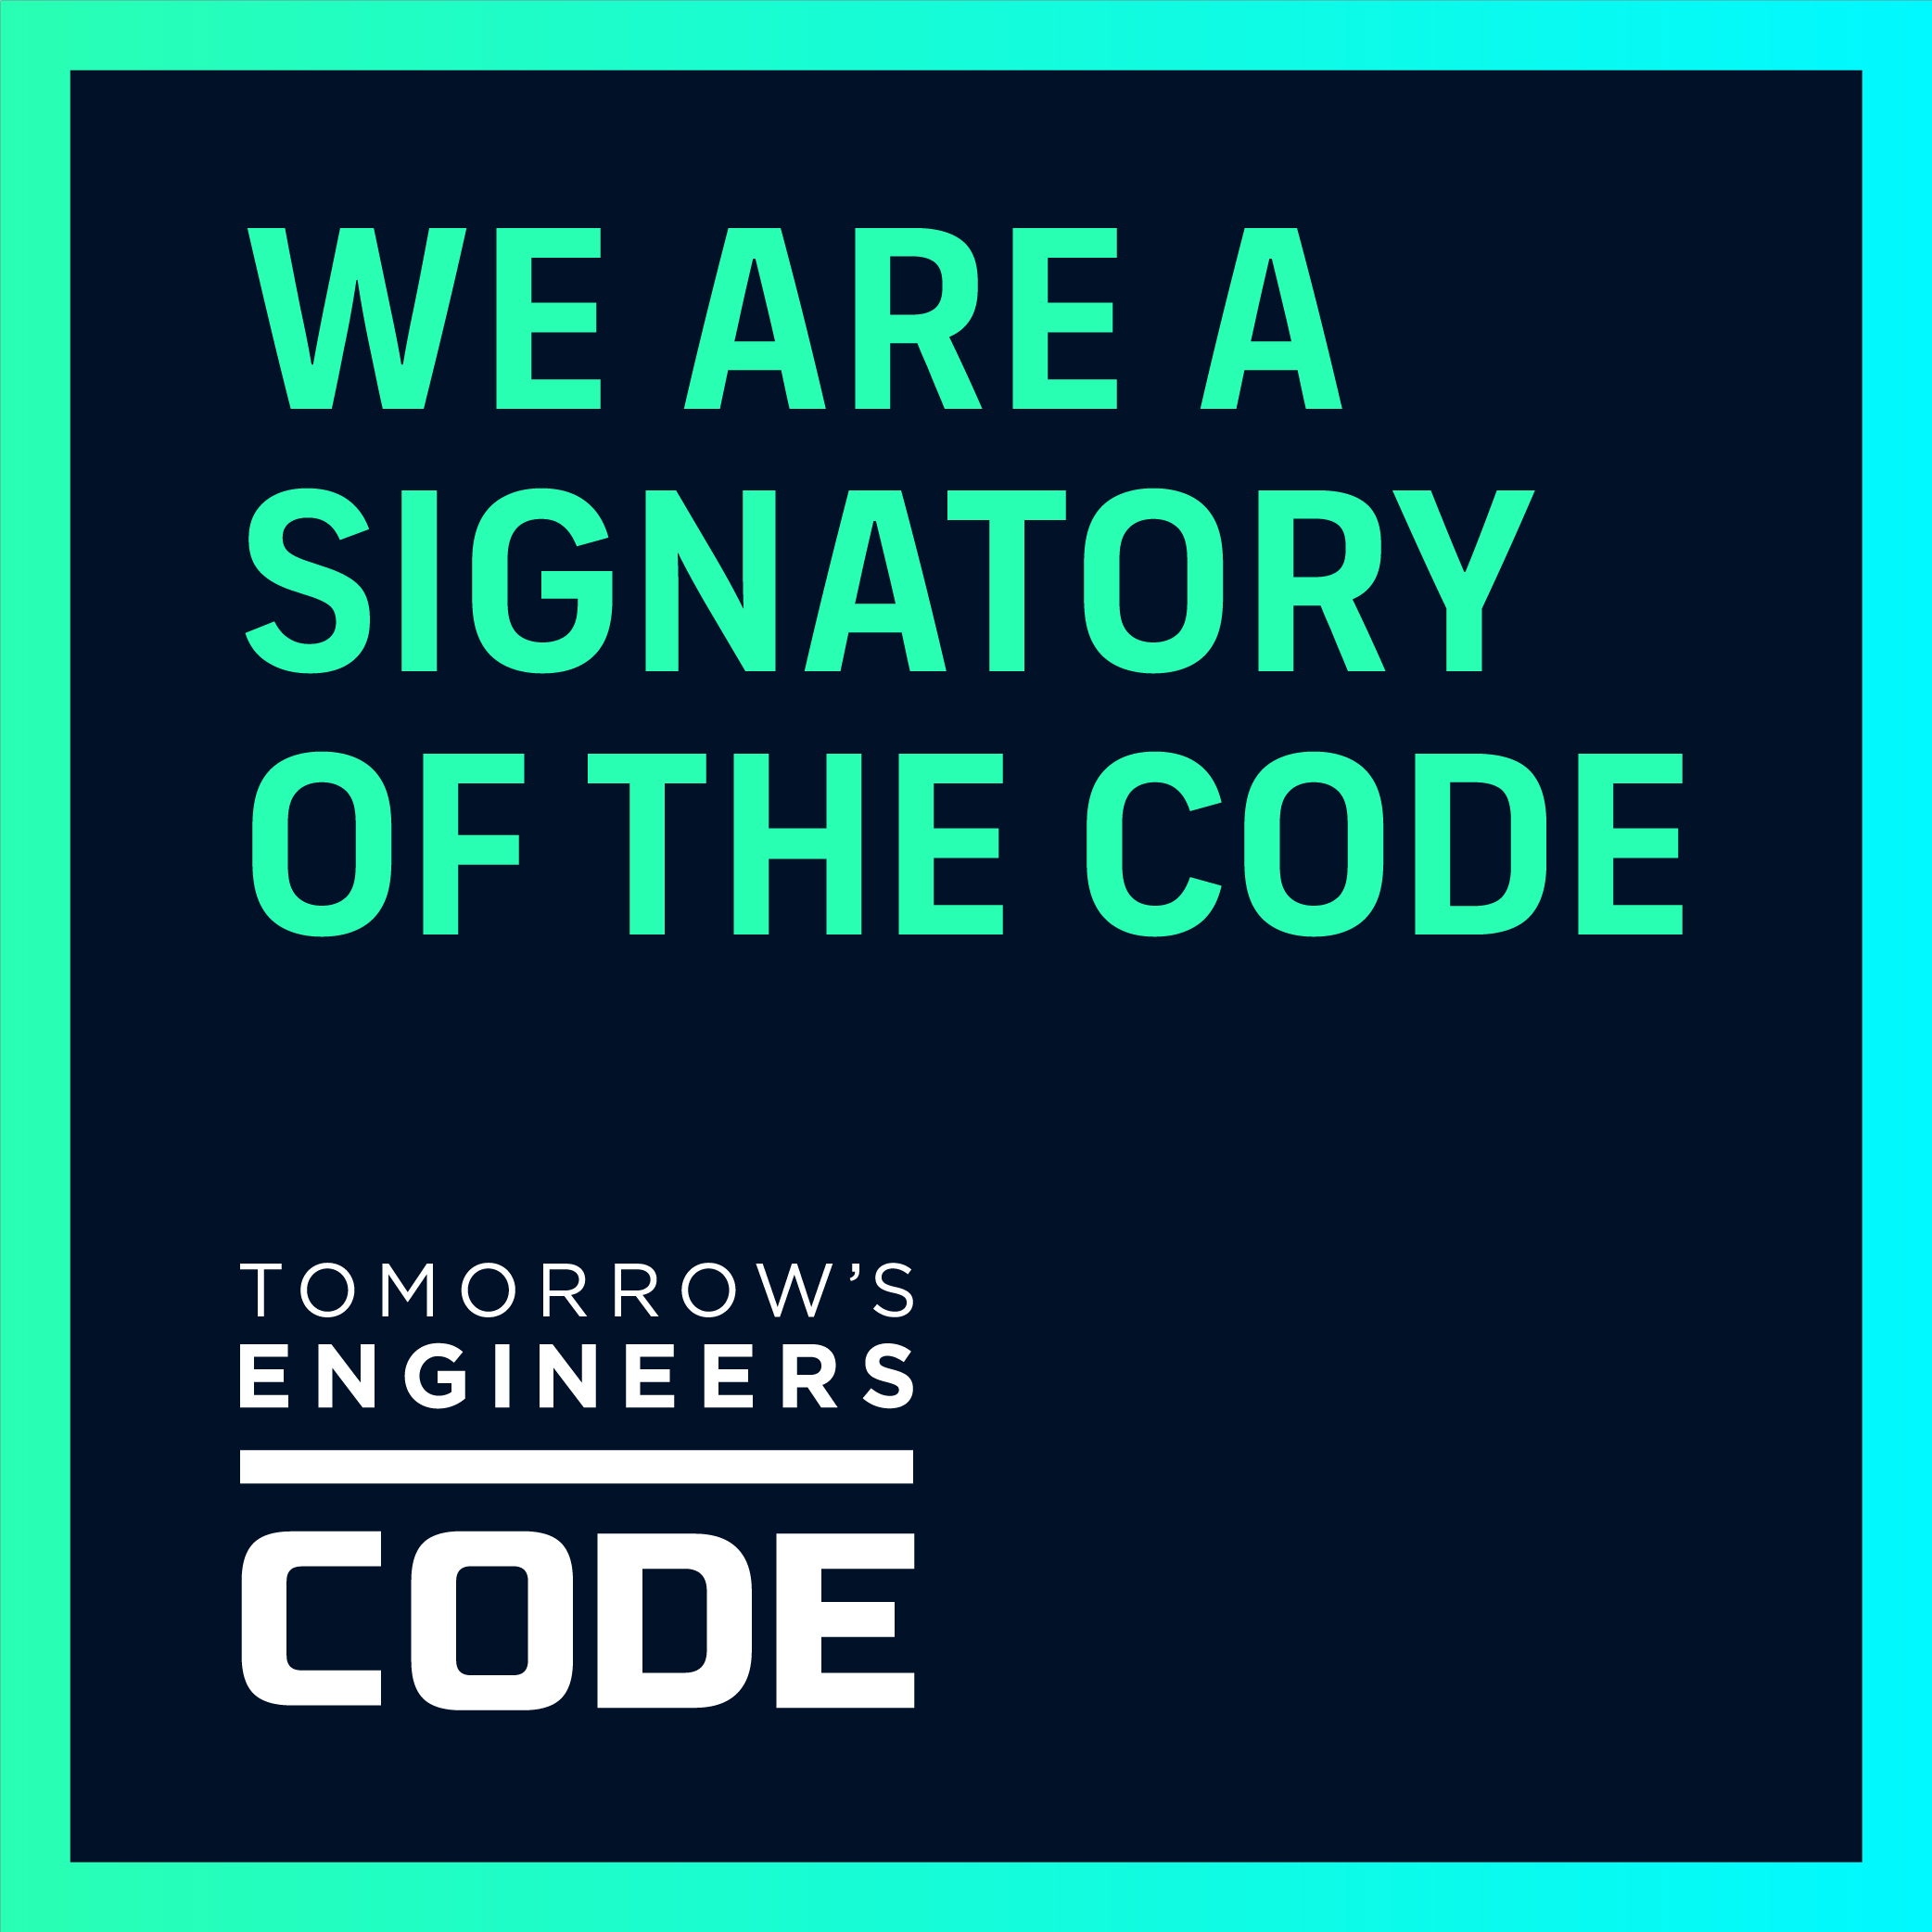 We are a signatory of the code